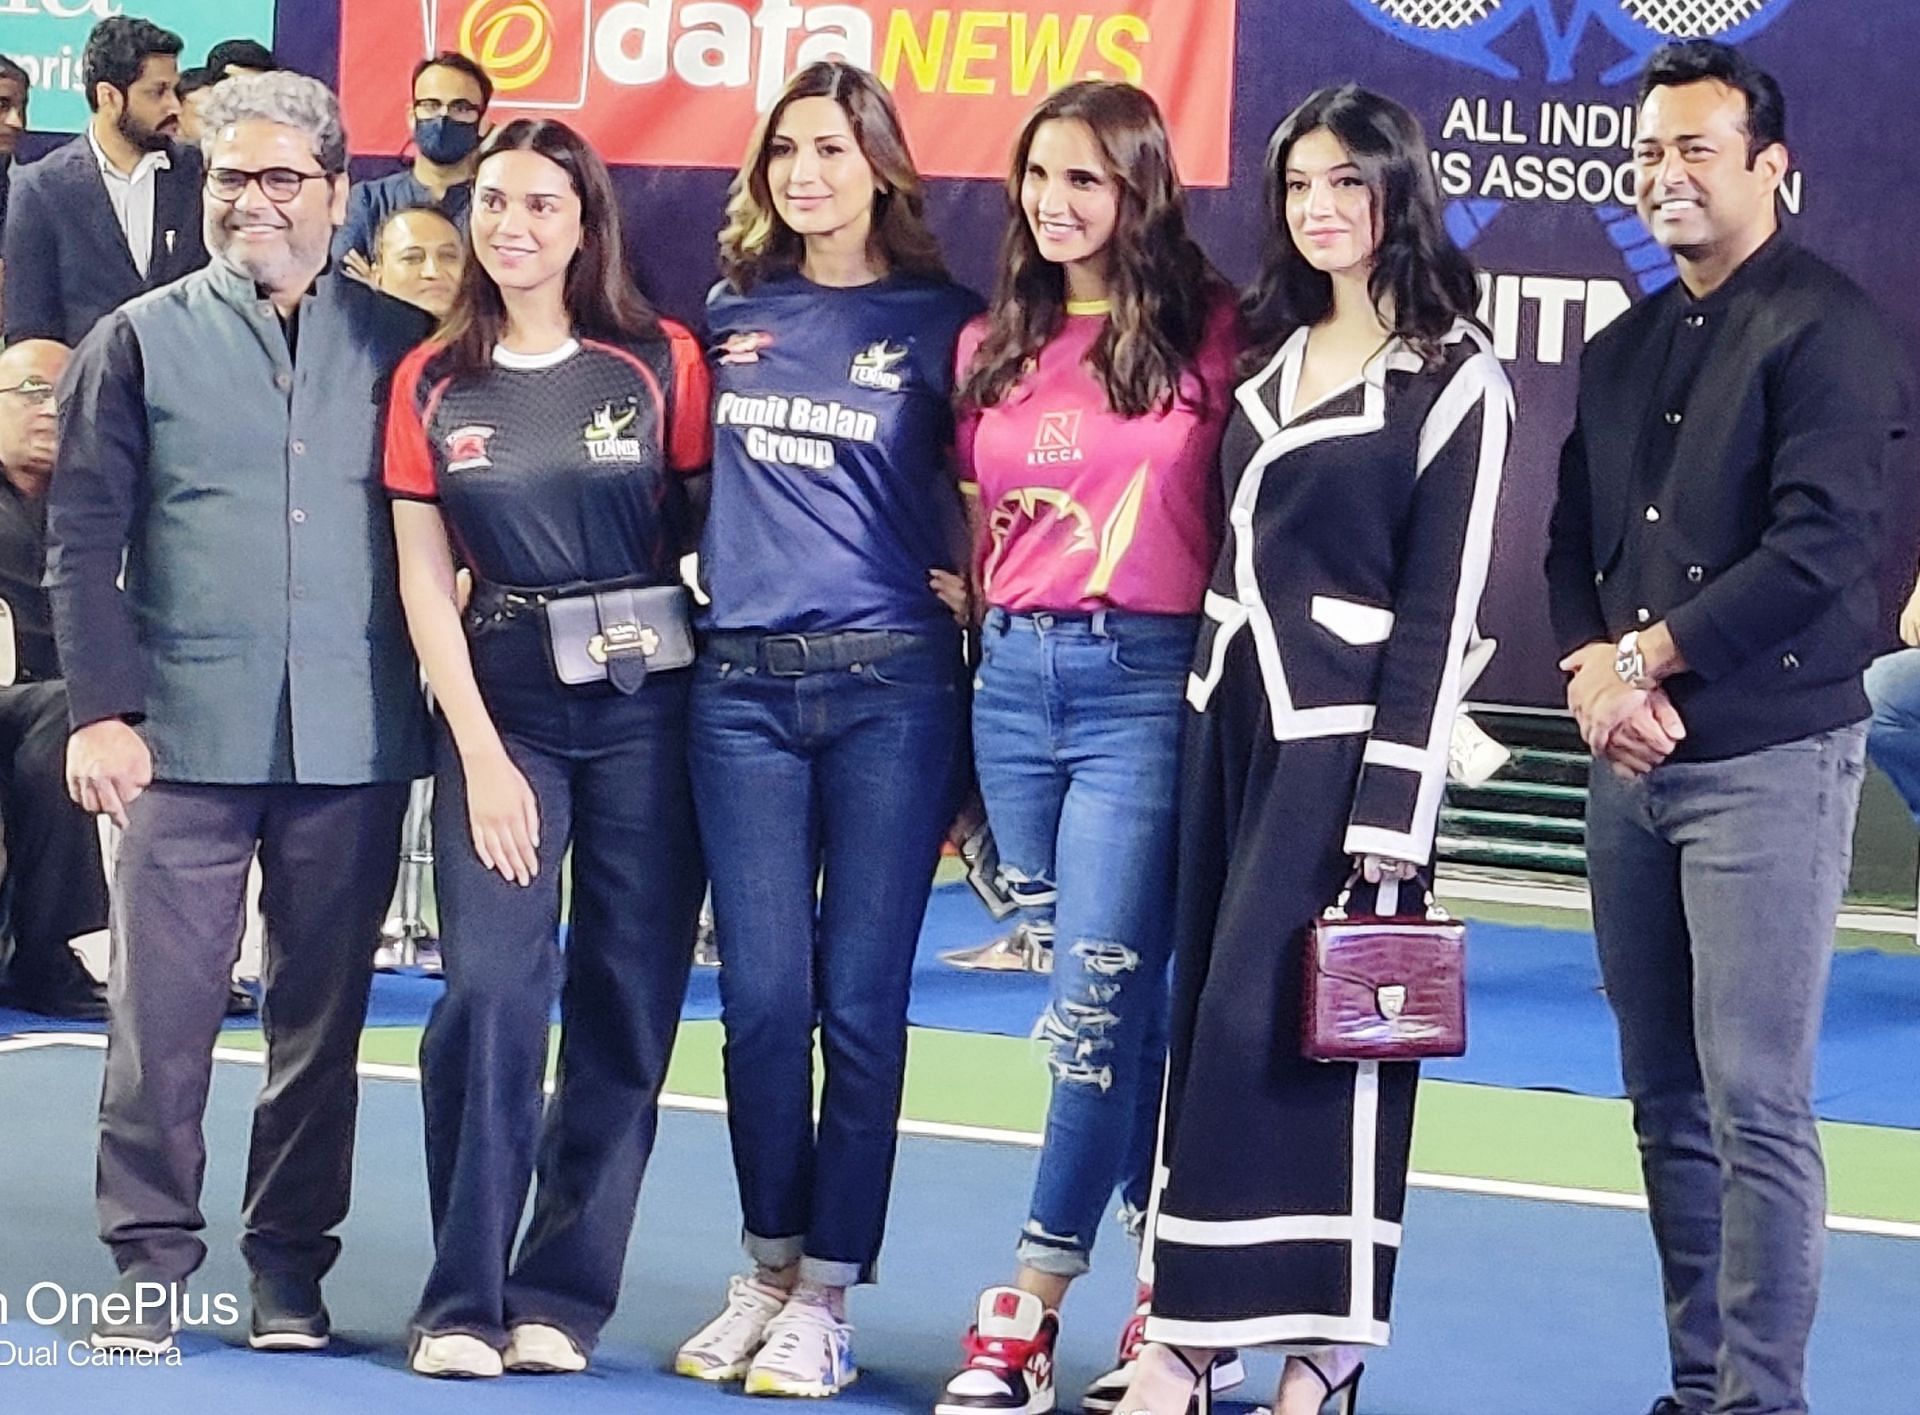 Tennis stars Sania Mirza, Leander Paes and other Bollywood celebrities during the inauguration